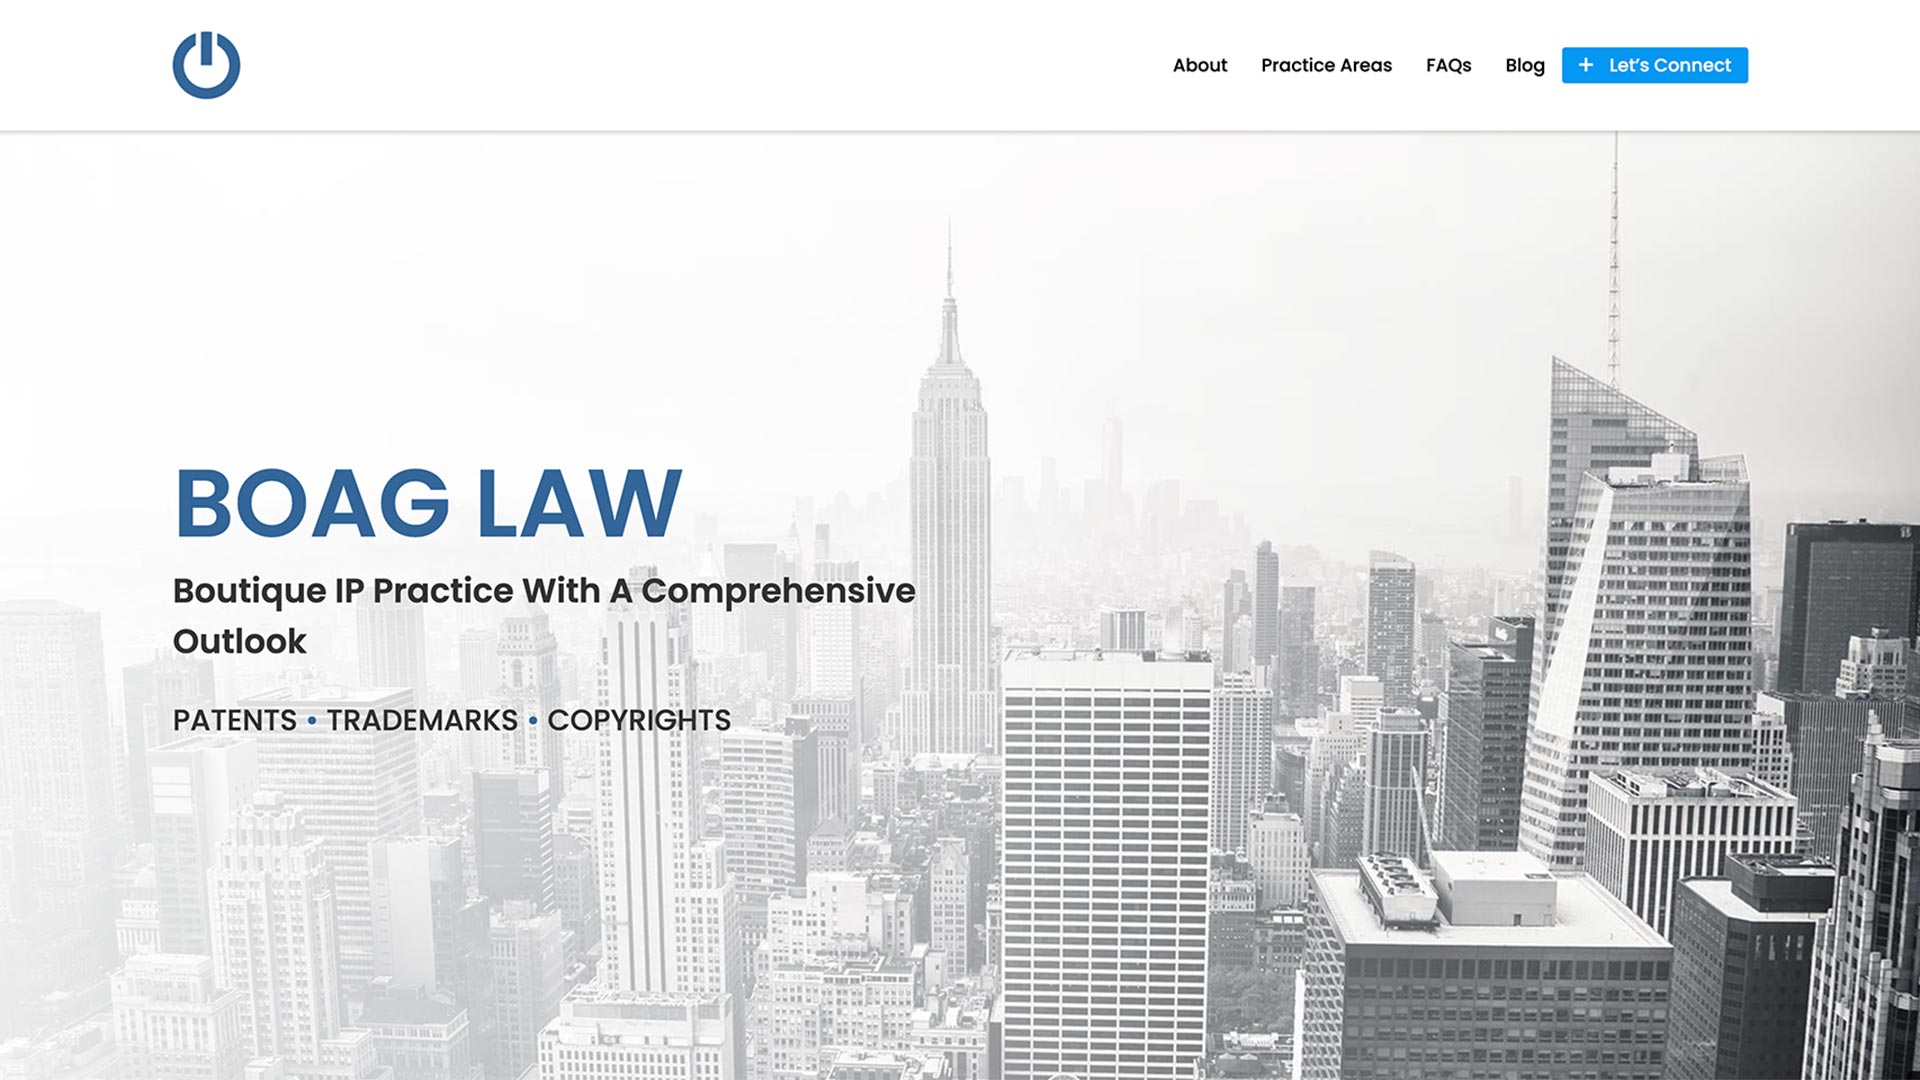 Small Law Firm Website Design: Boag Law